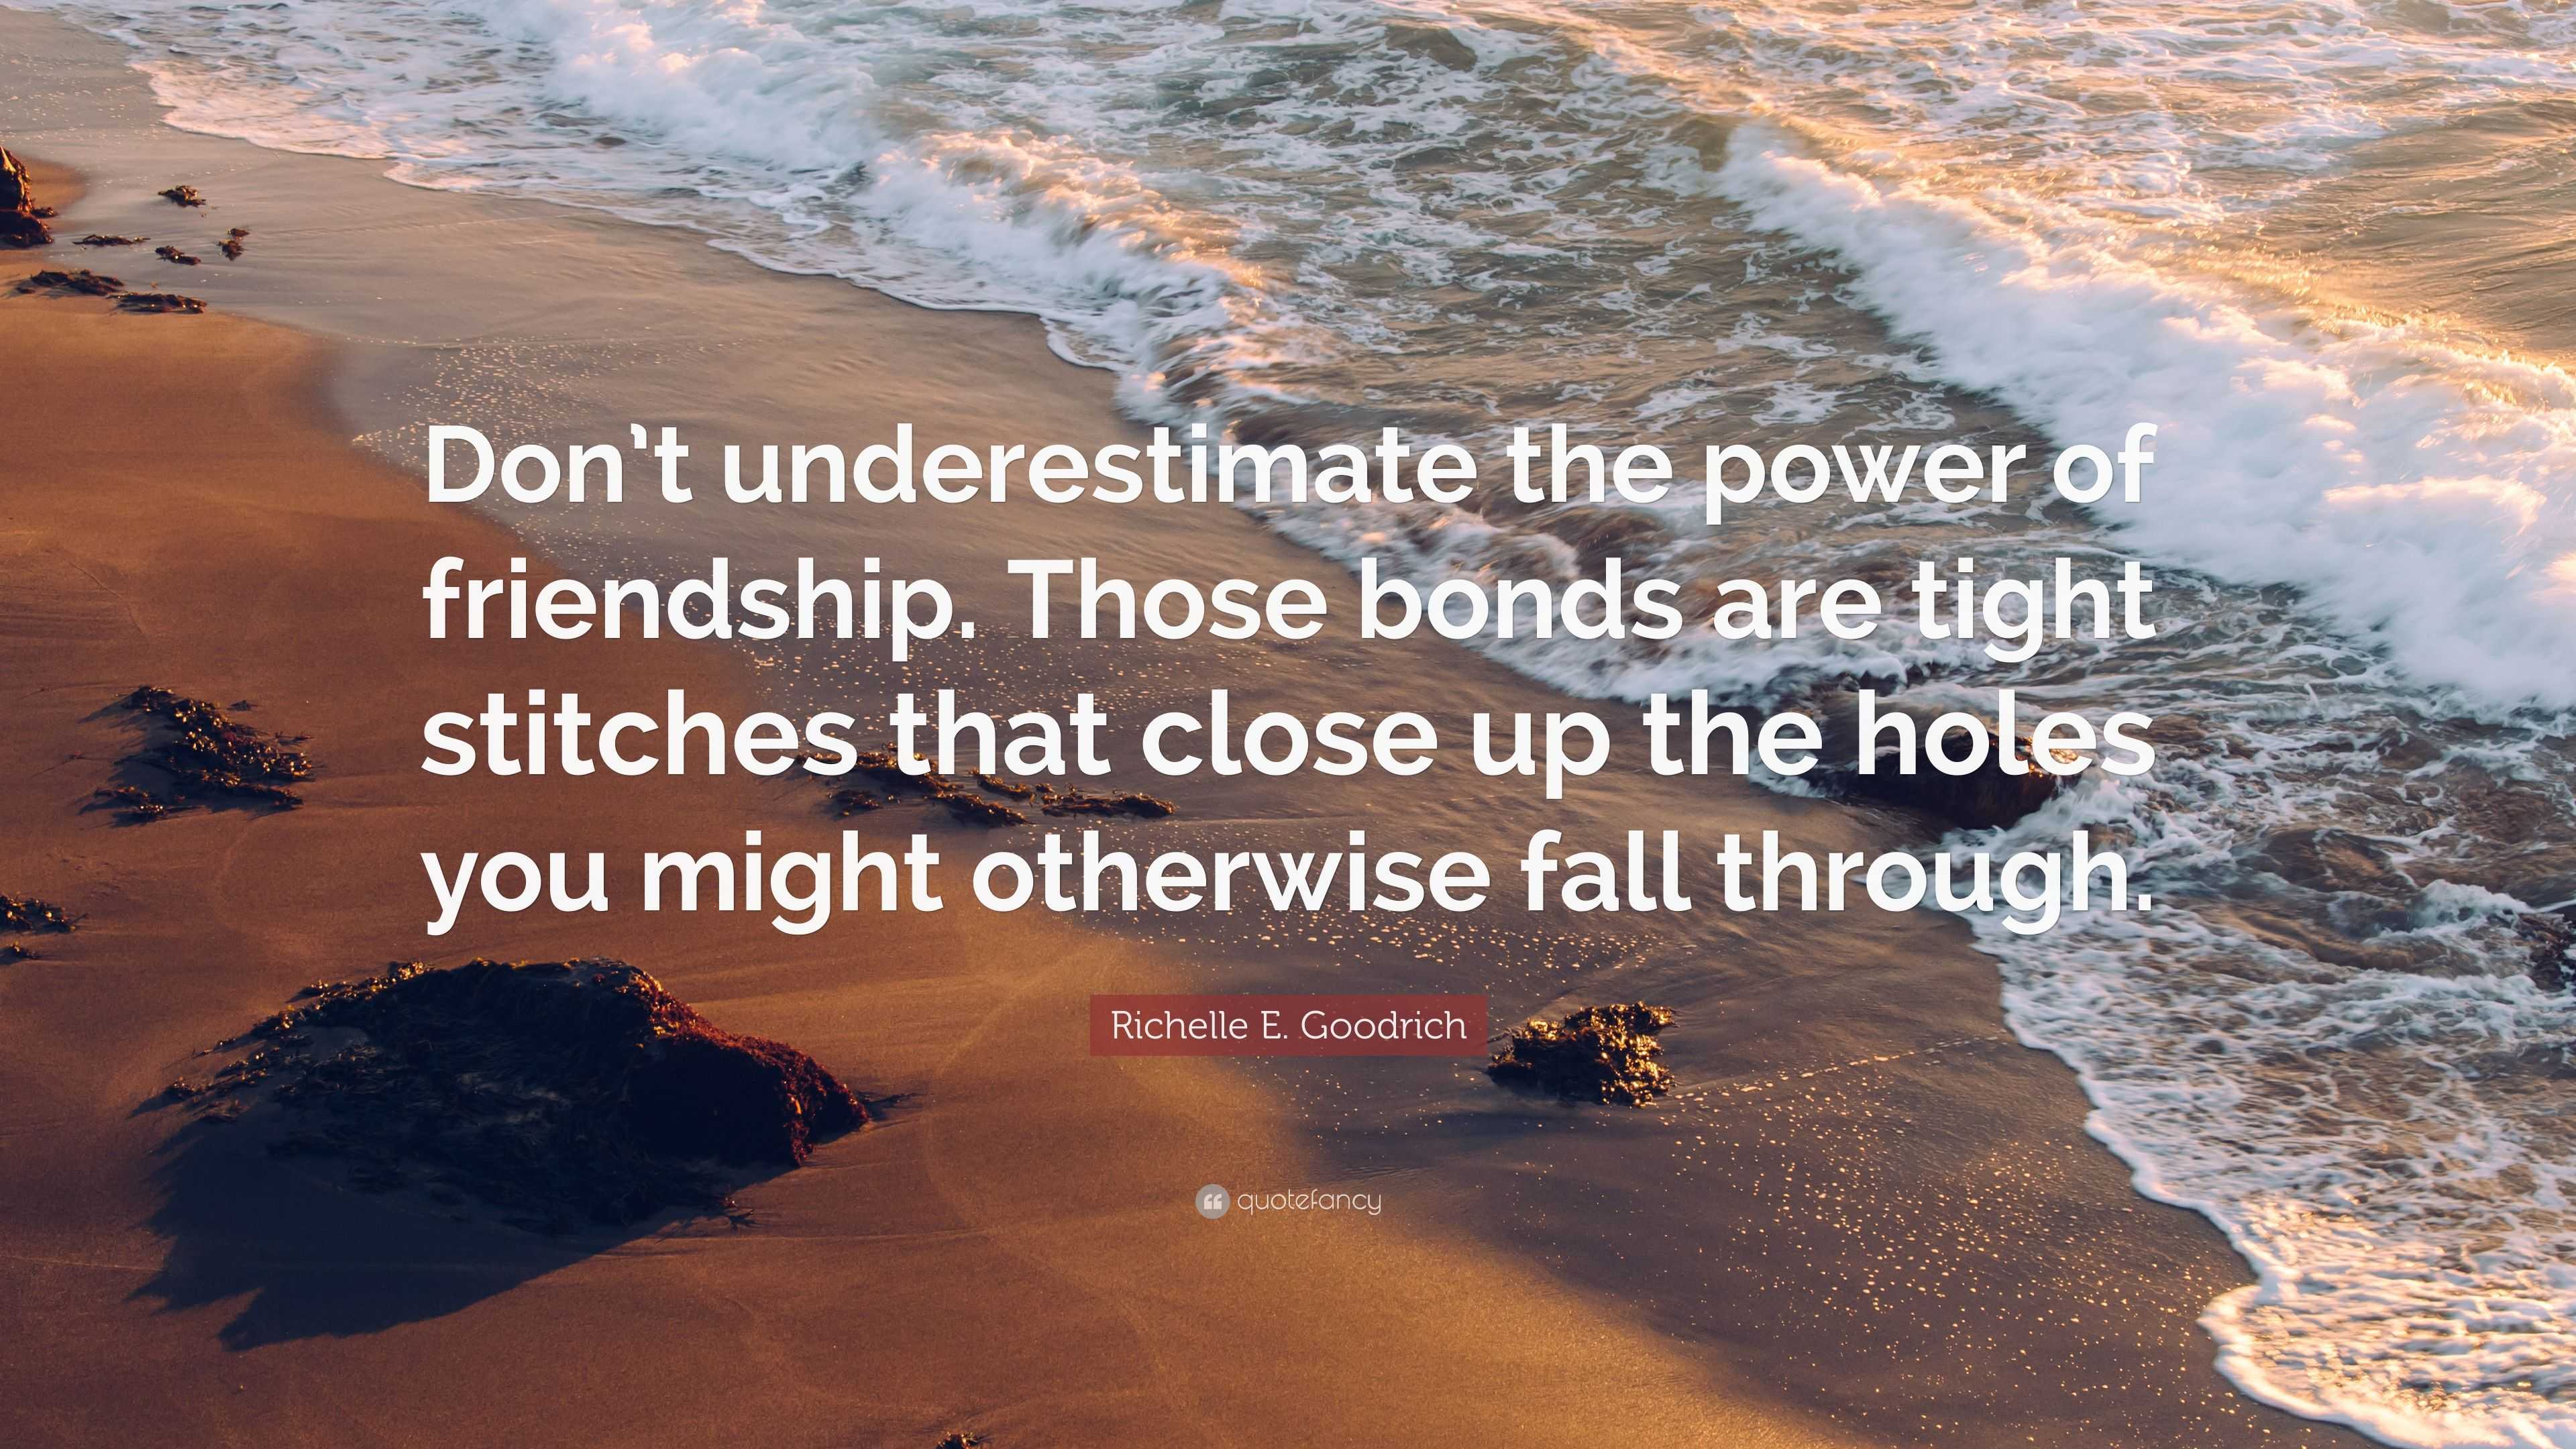 36 quotes about the power & importance of adult friendships - Stitch